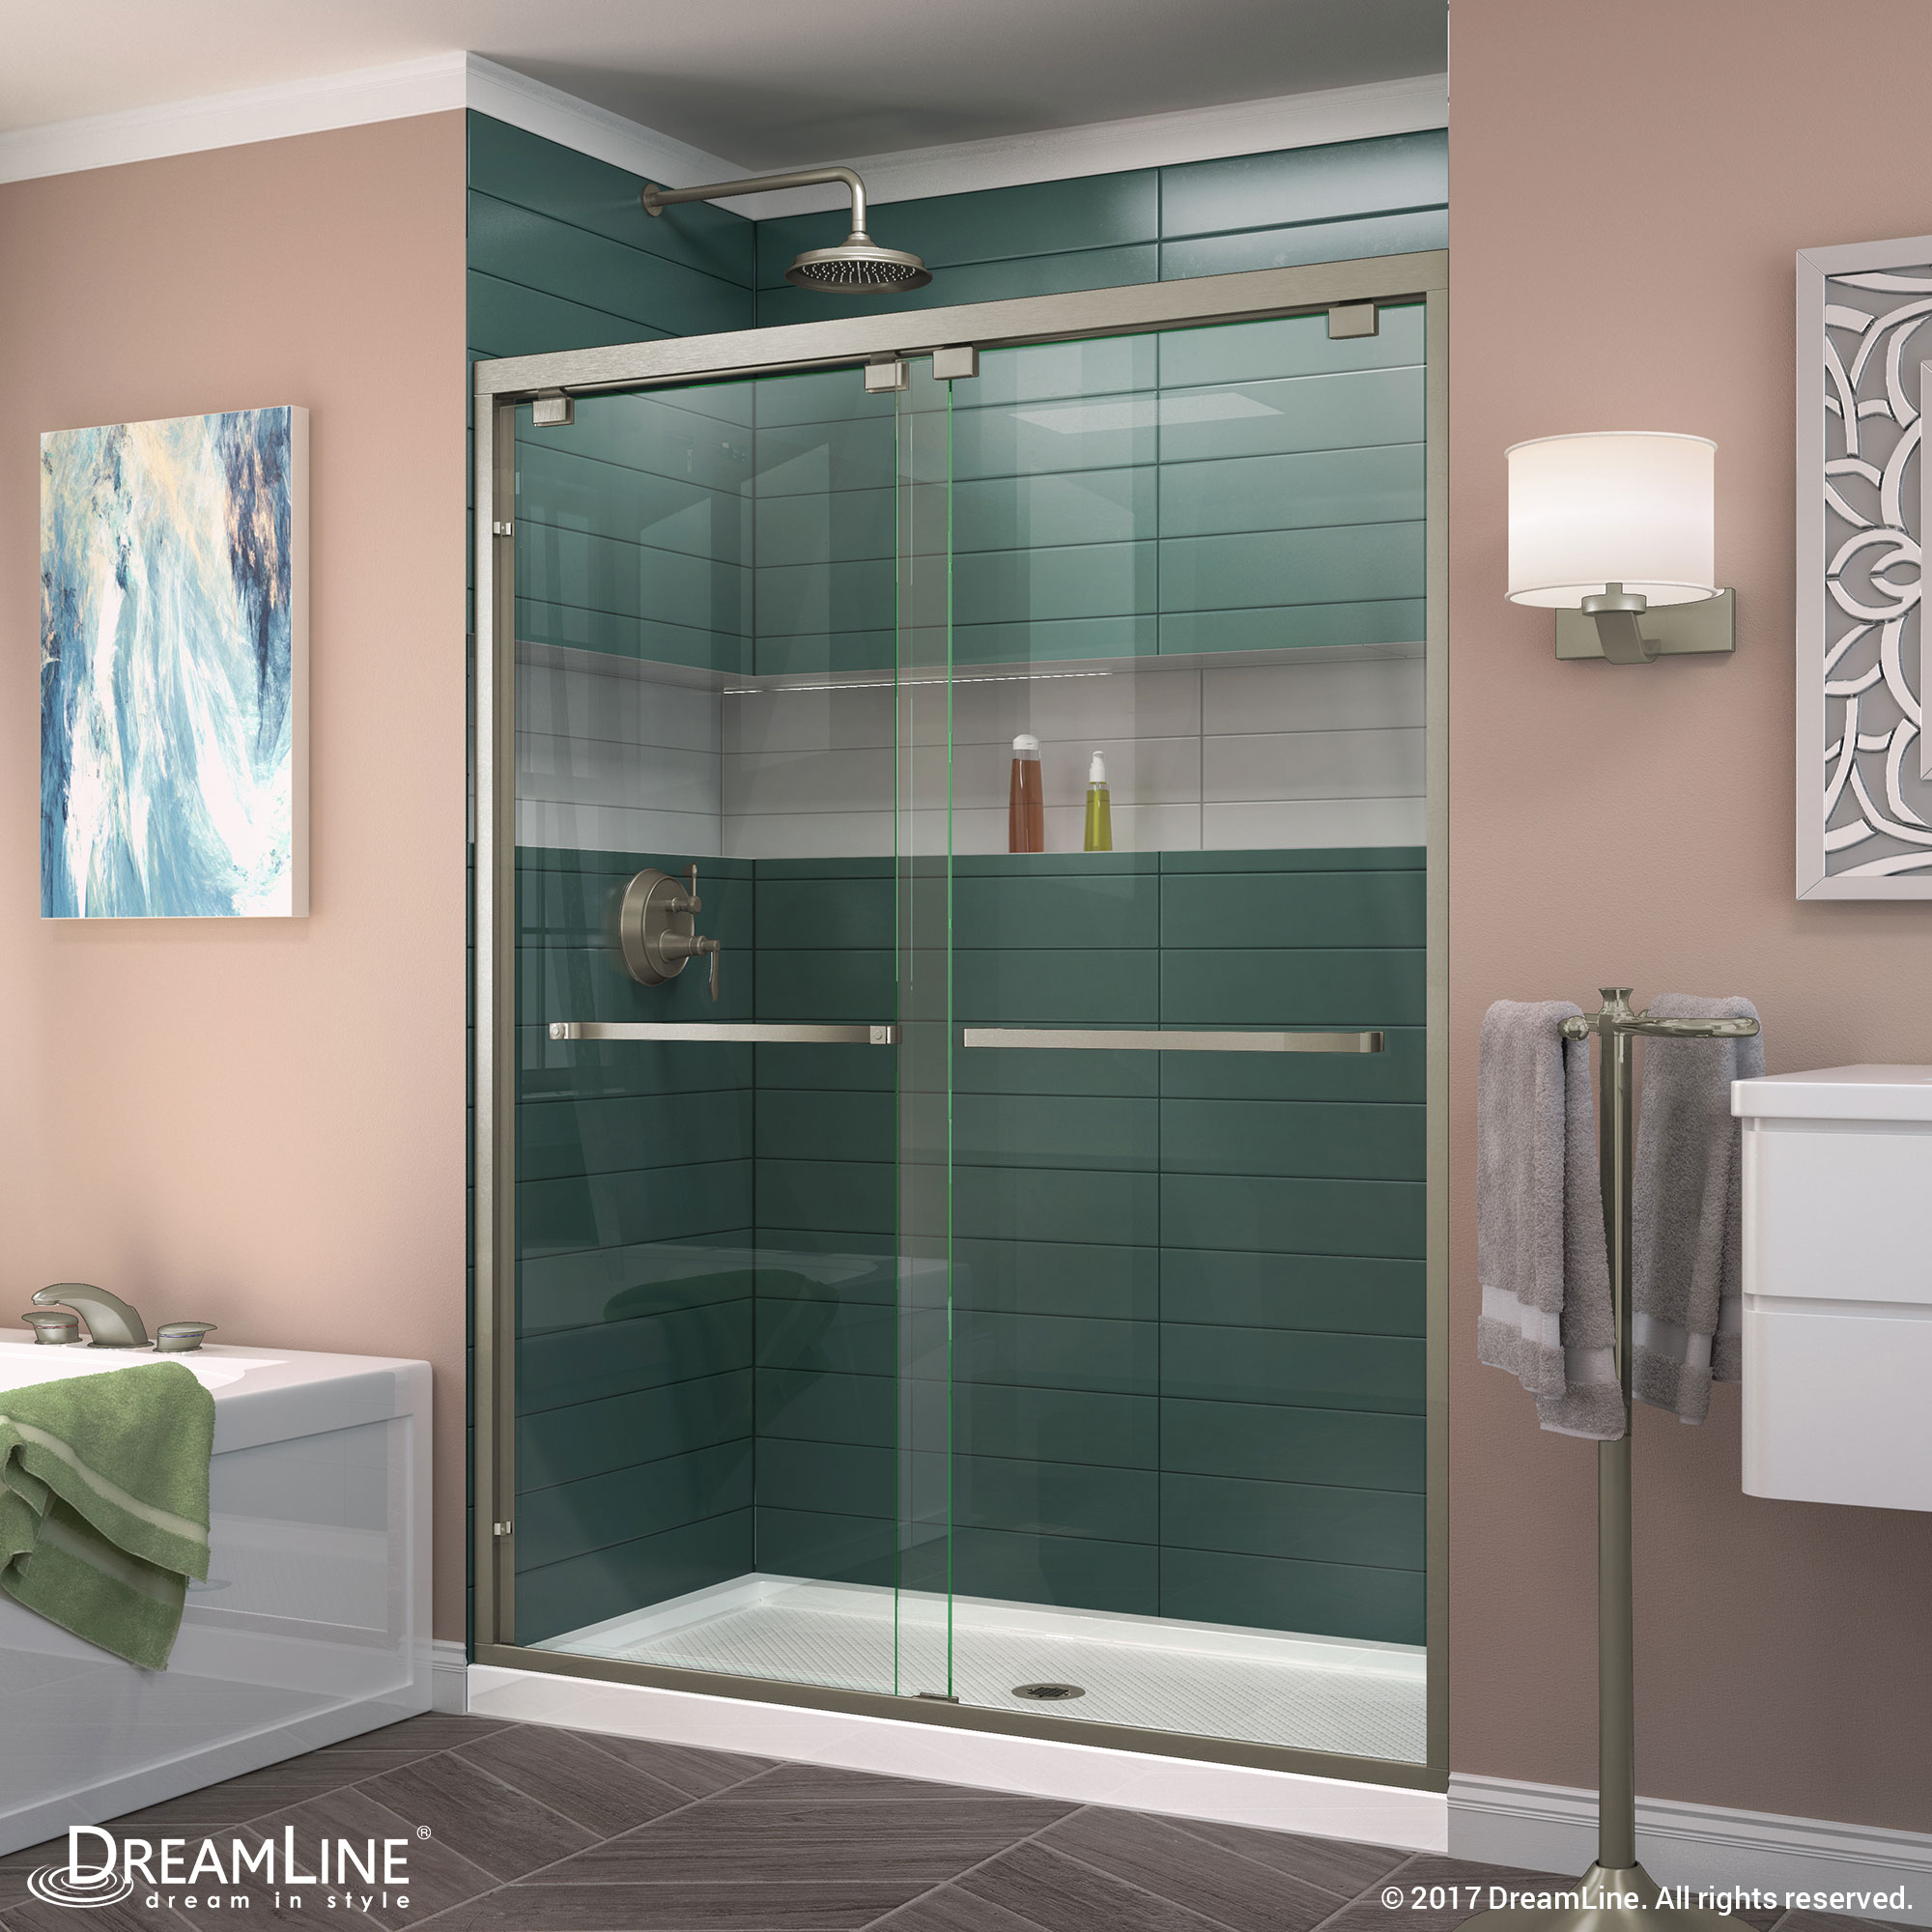 DreamLine Encore 32 in. D x 48 in. W x 78 3/4 in. H Bypass Shower Door in Chrome and Center Drain Black Base Kit